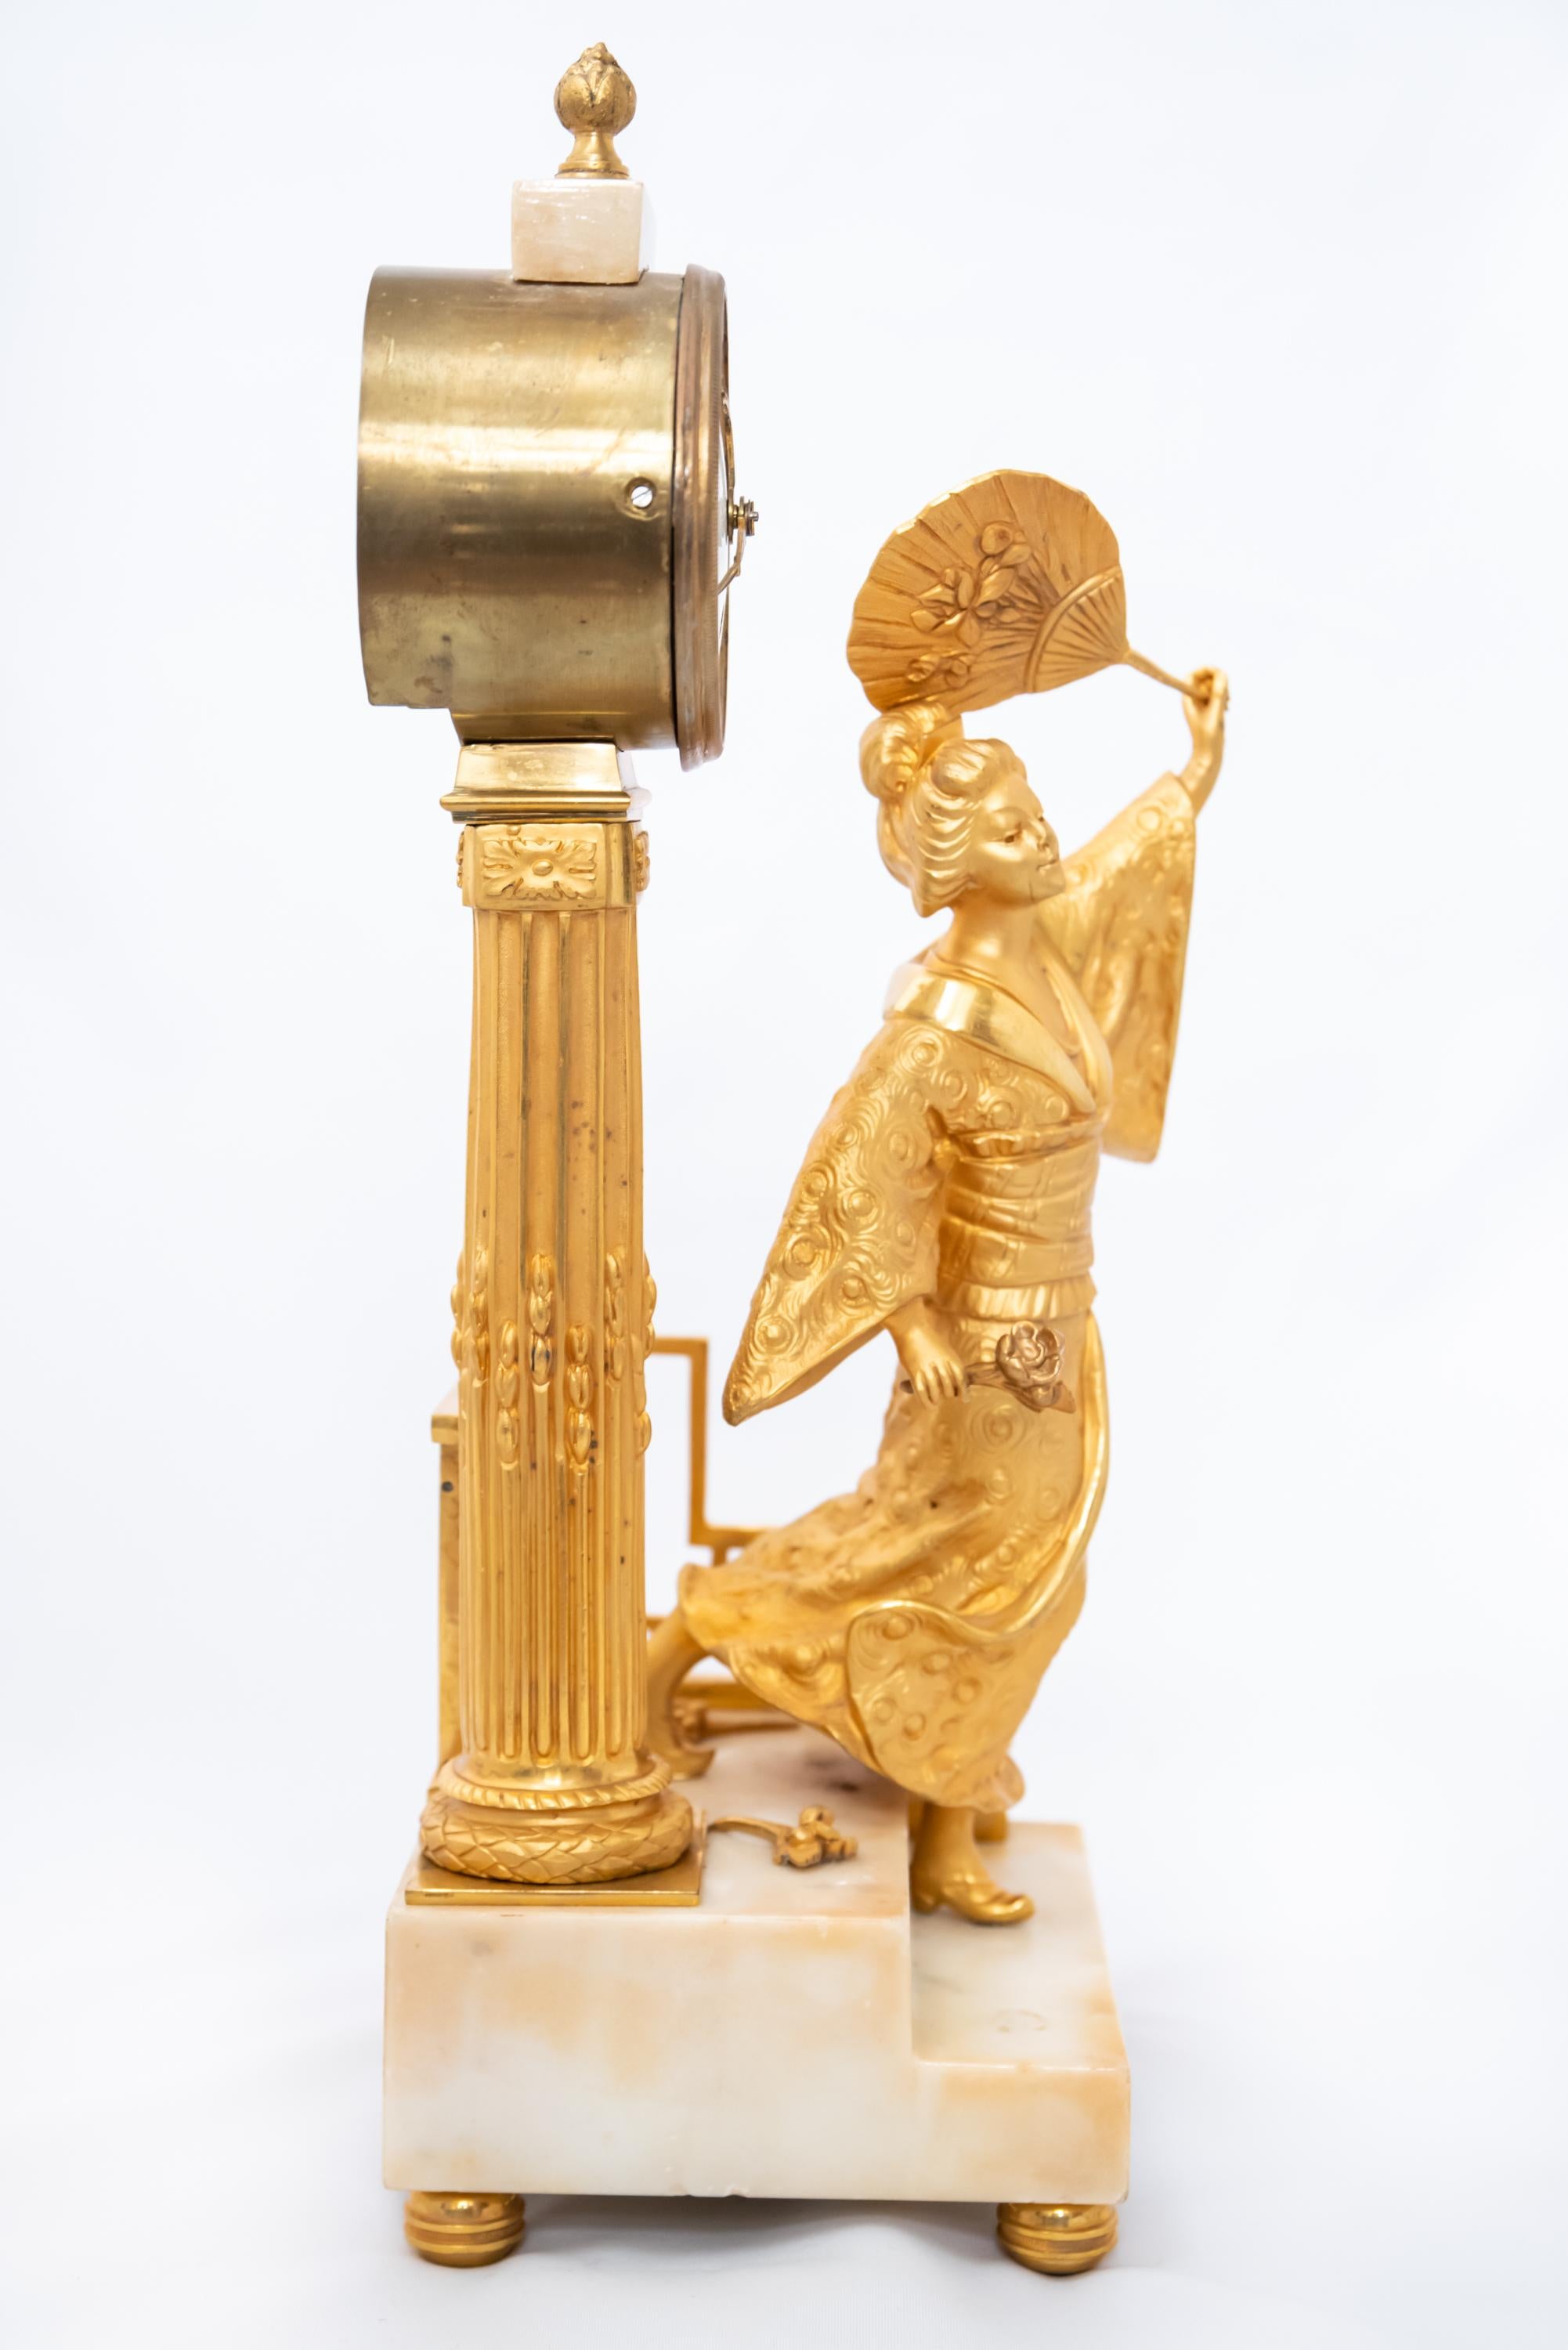 A French fire-gilt bronze clock with marble base depicting a Japanese woman, Louis XVI or Empire Era, 1790-1815. The silk-thread mechanism is in good working condition with key and pendulum.